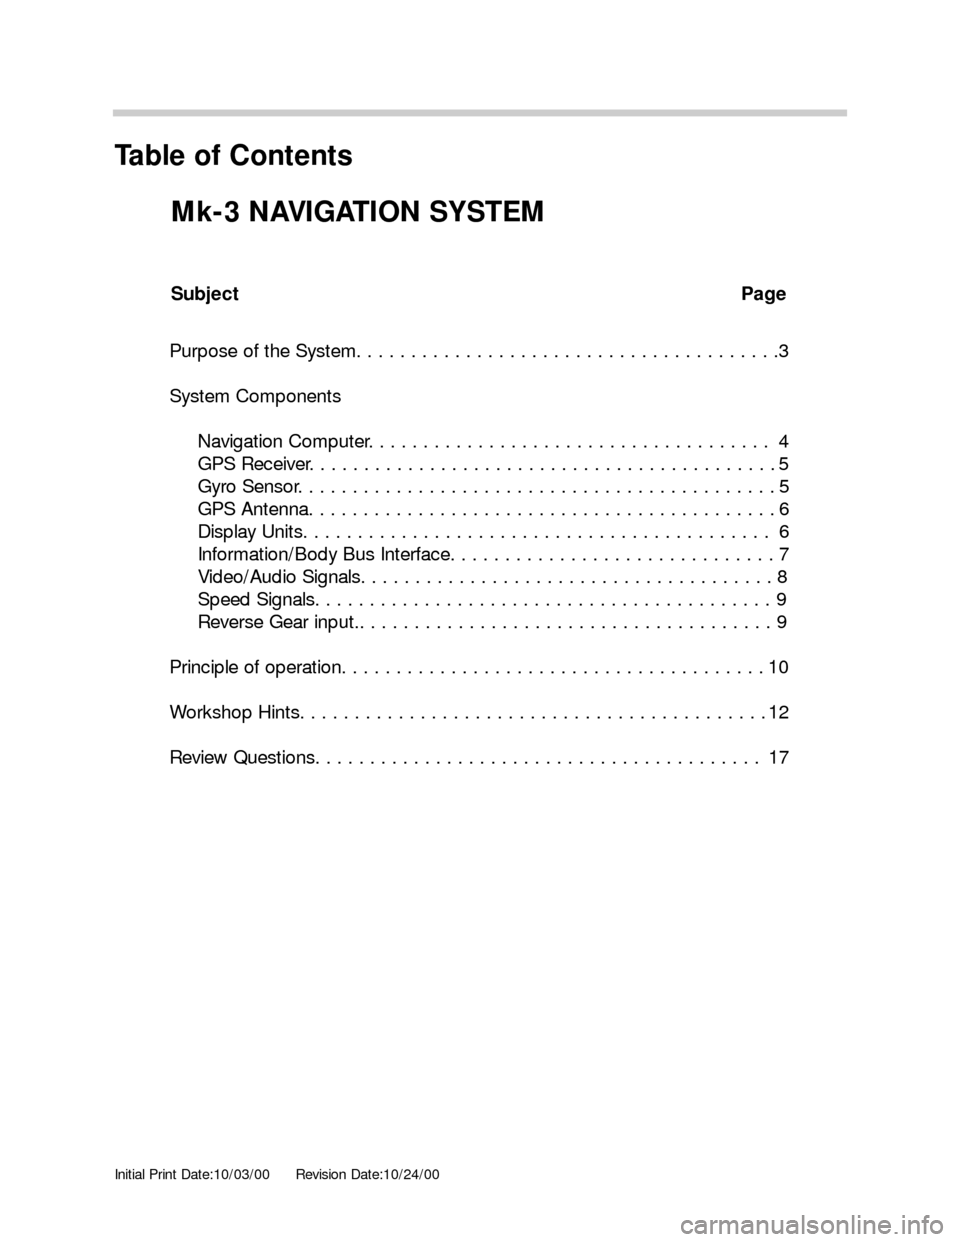 BMW 3 SERIES 2004 E46 Mk3 Navigation System Manual Initial Print Date:10/03/00Revision Date:10/24/00
Subject Page
Purpose of the System. . . . . . . . . . . . . . . . . . . . . . . . . . . . . . . . . . . . . . .3
System Components
Navigation Computer